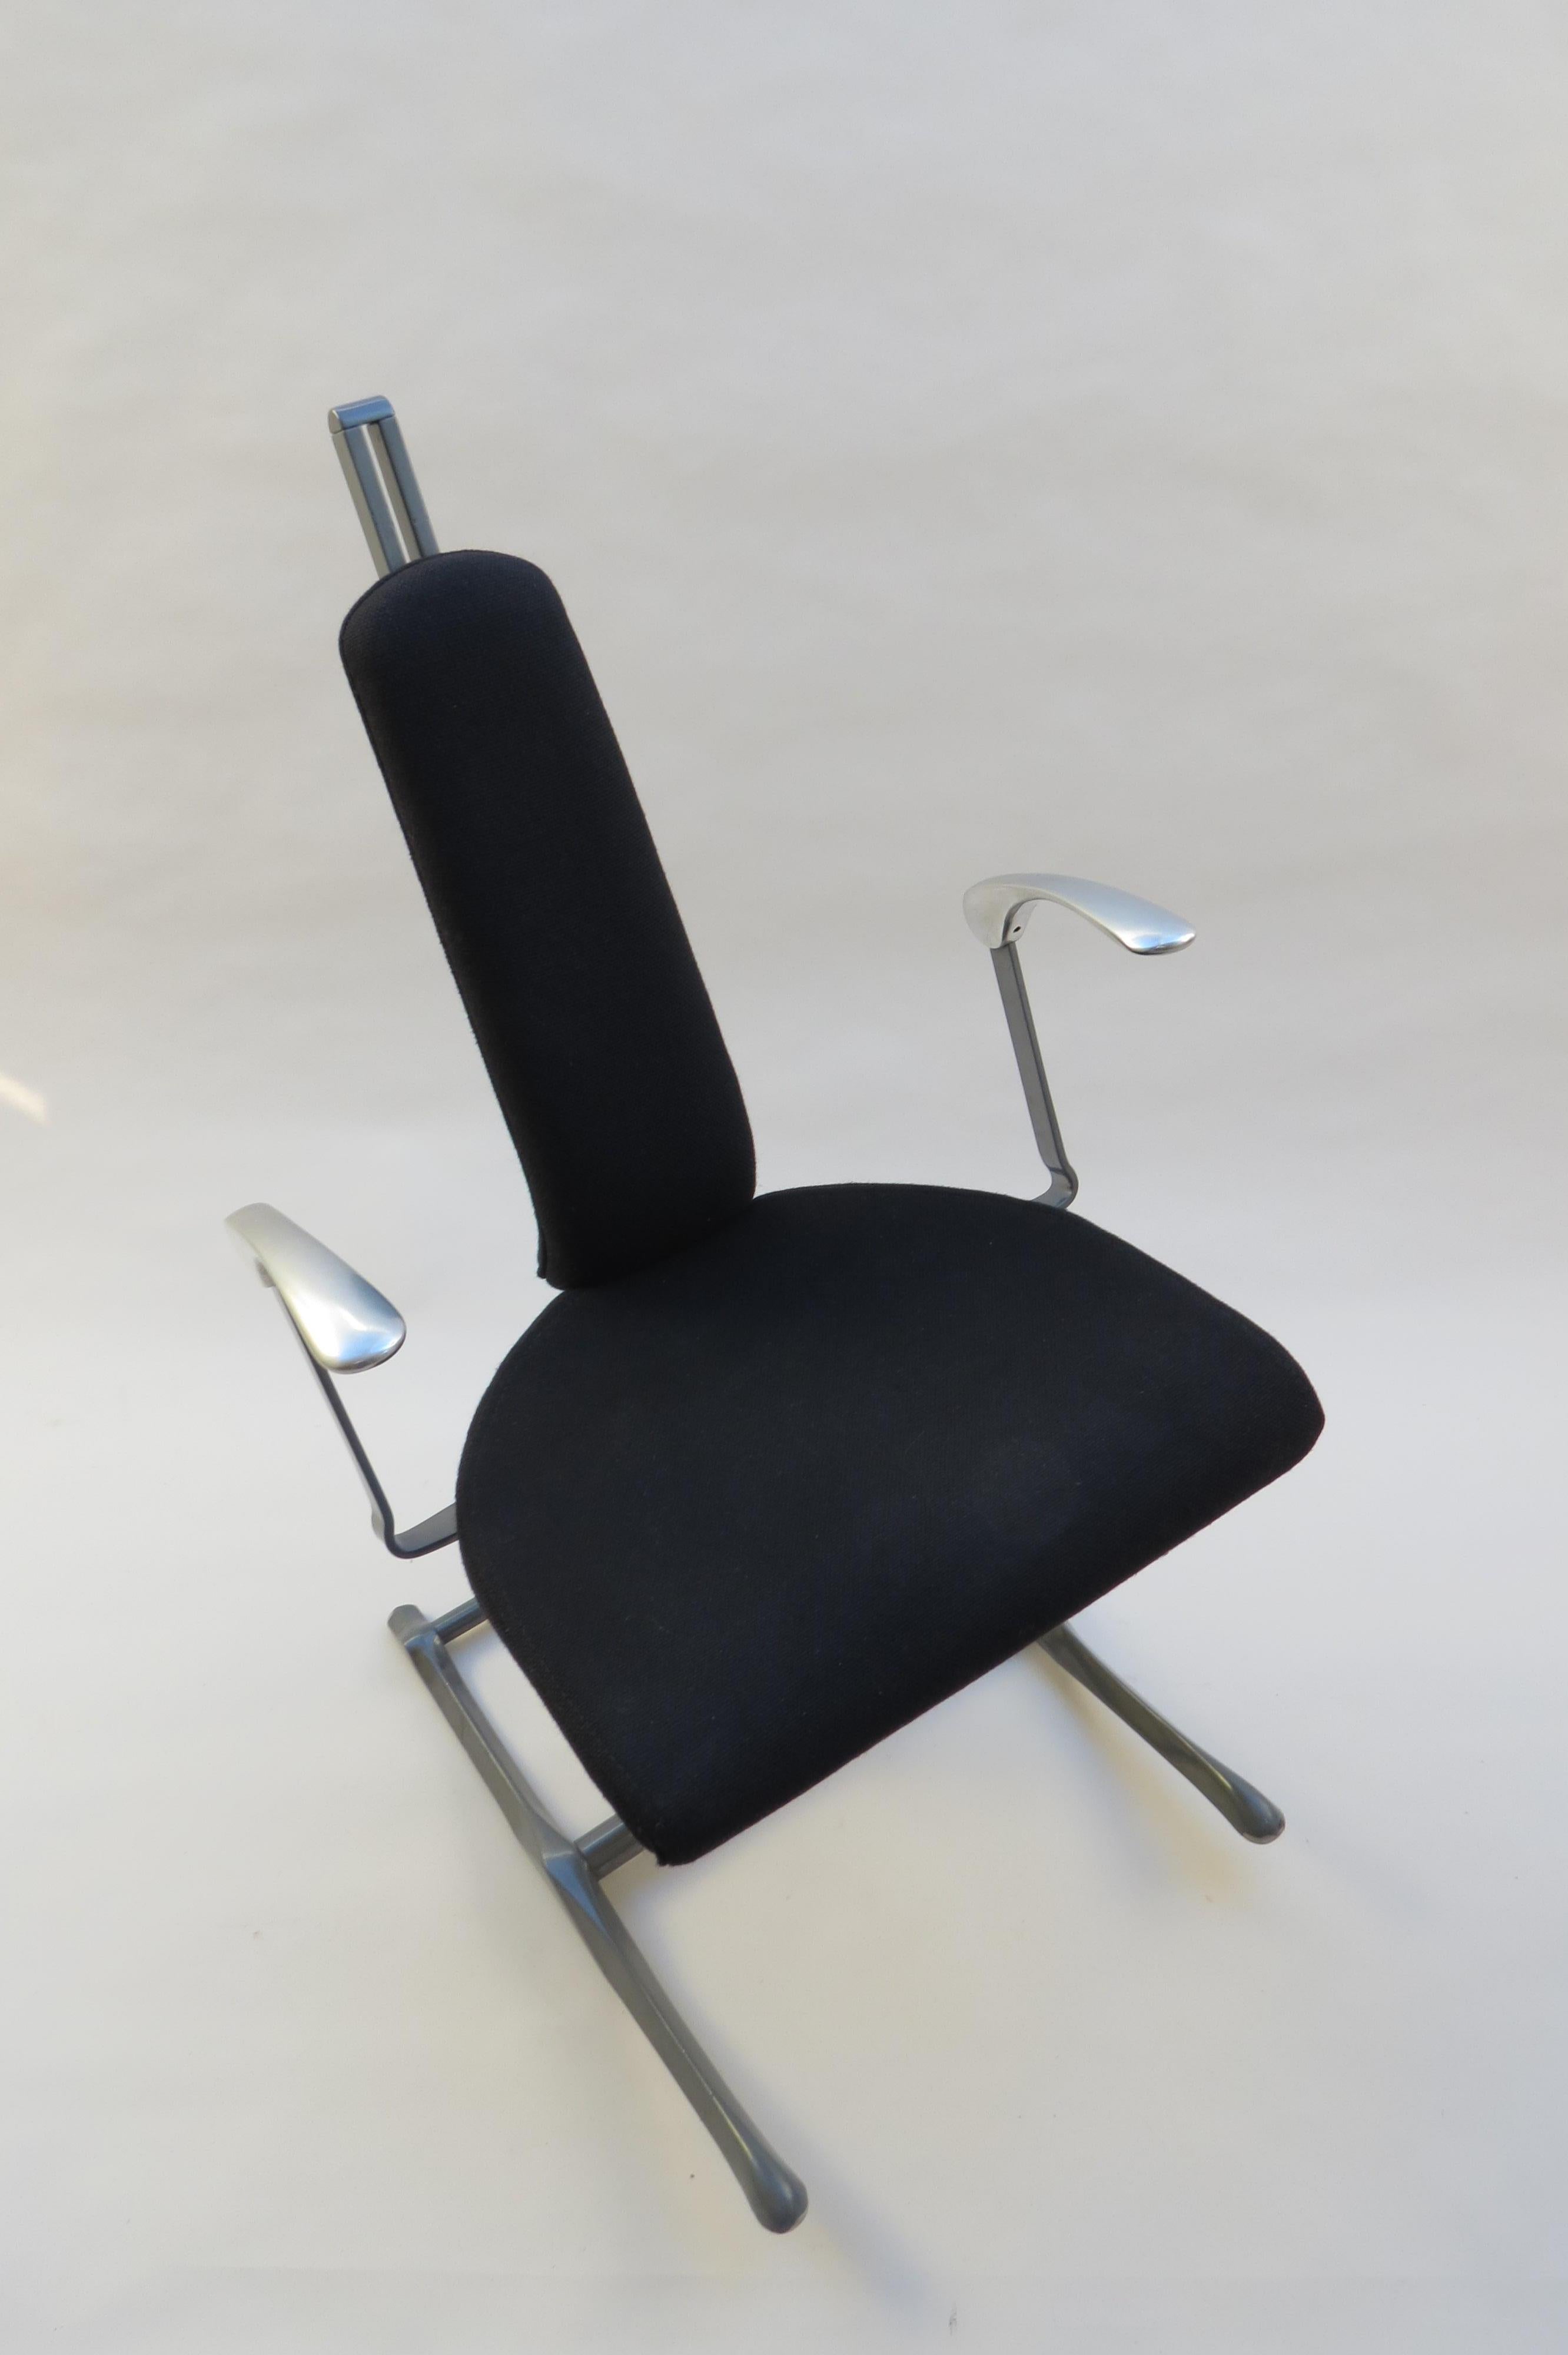 Office chair designed by Michael Dye for Hille. Dates from the 1990s. 
The chair adjusts to suit you, both the backrest and the seat. The base also rocks into 3 different positions. Incredibly comfortable and provides a very comfortable sitting